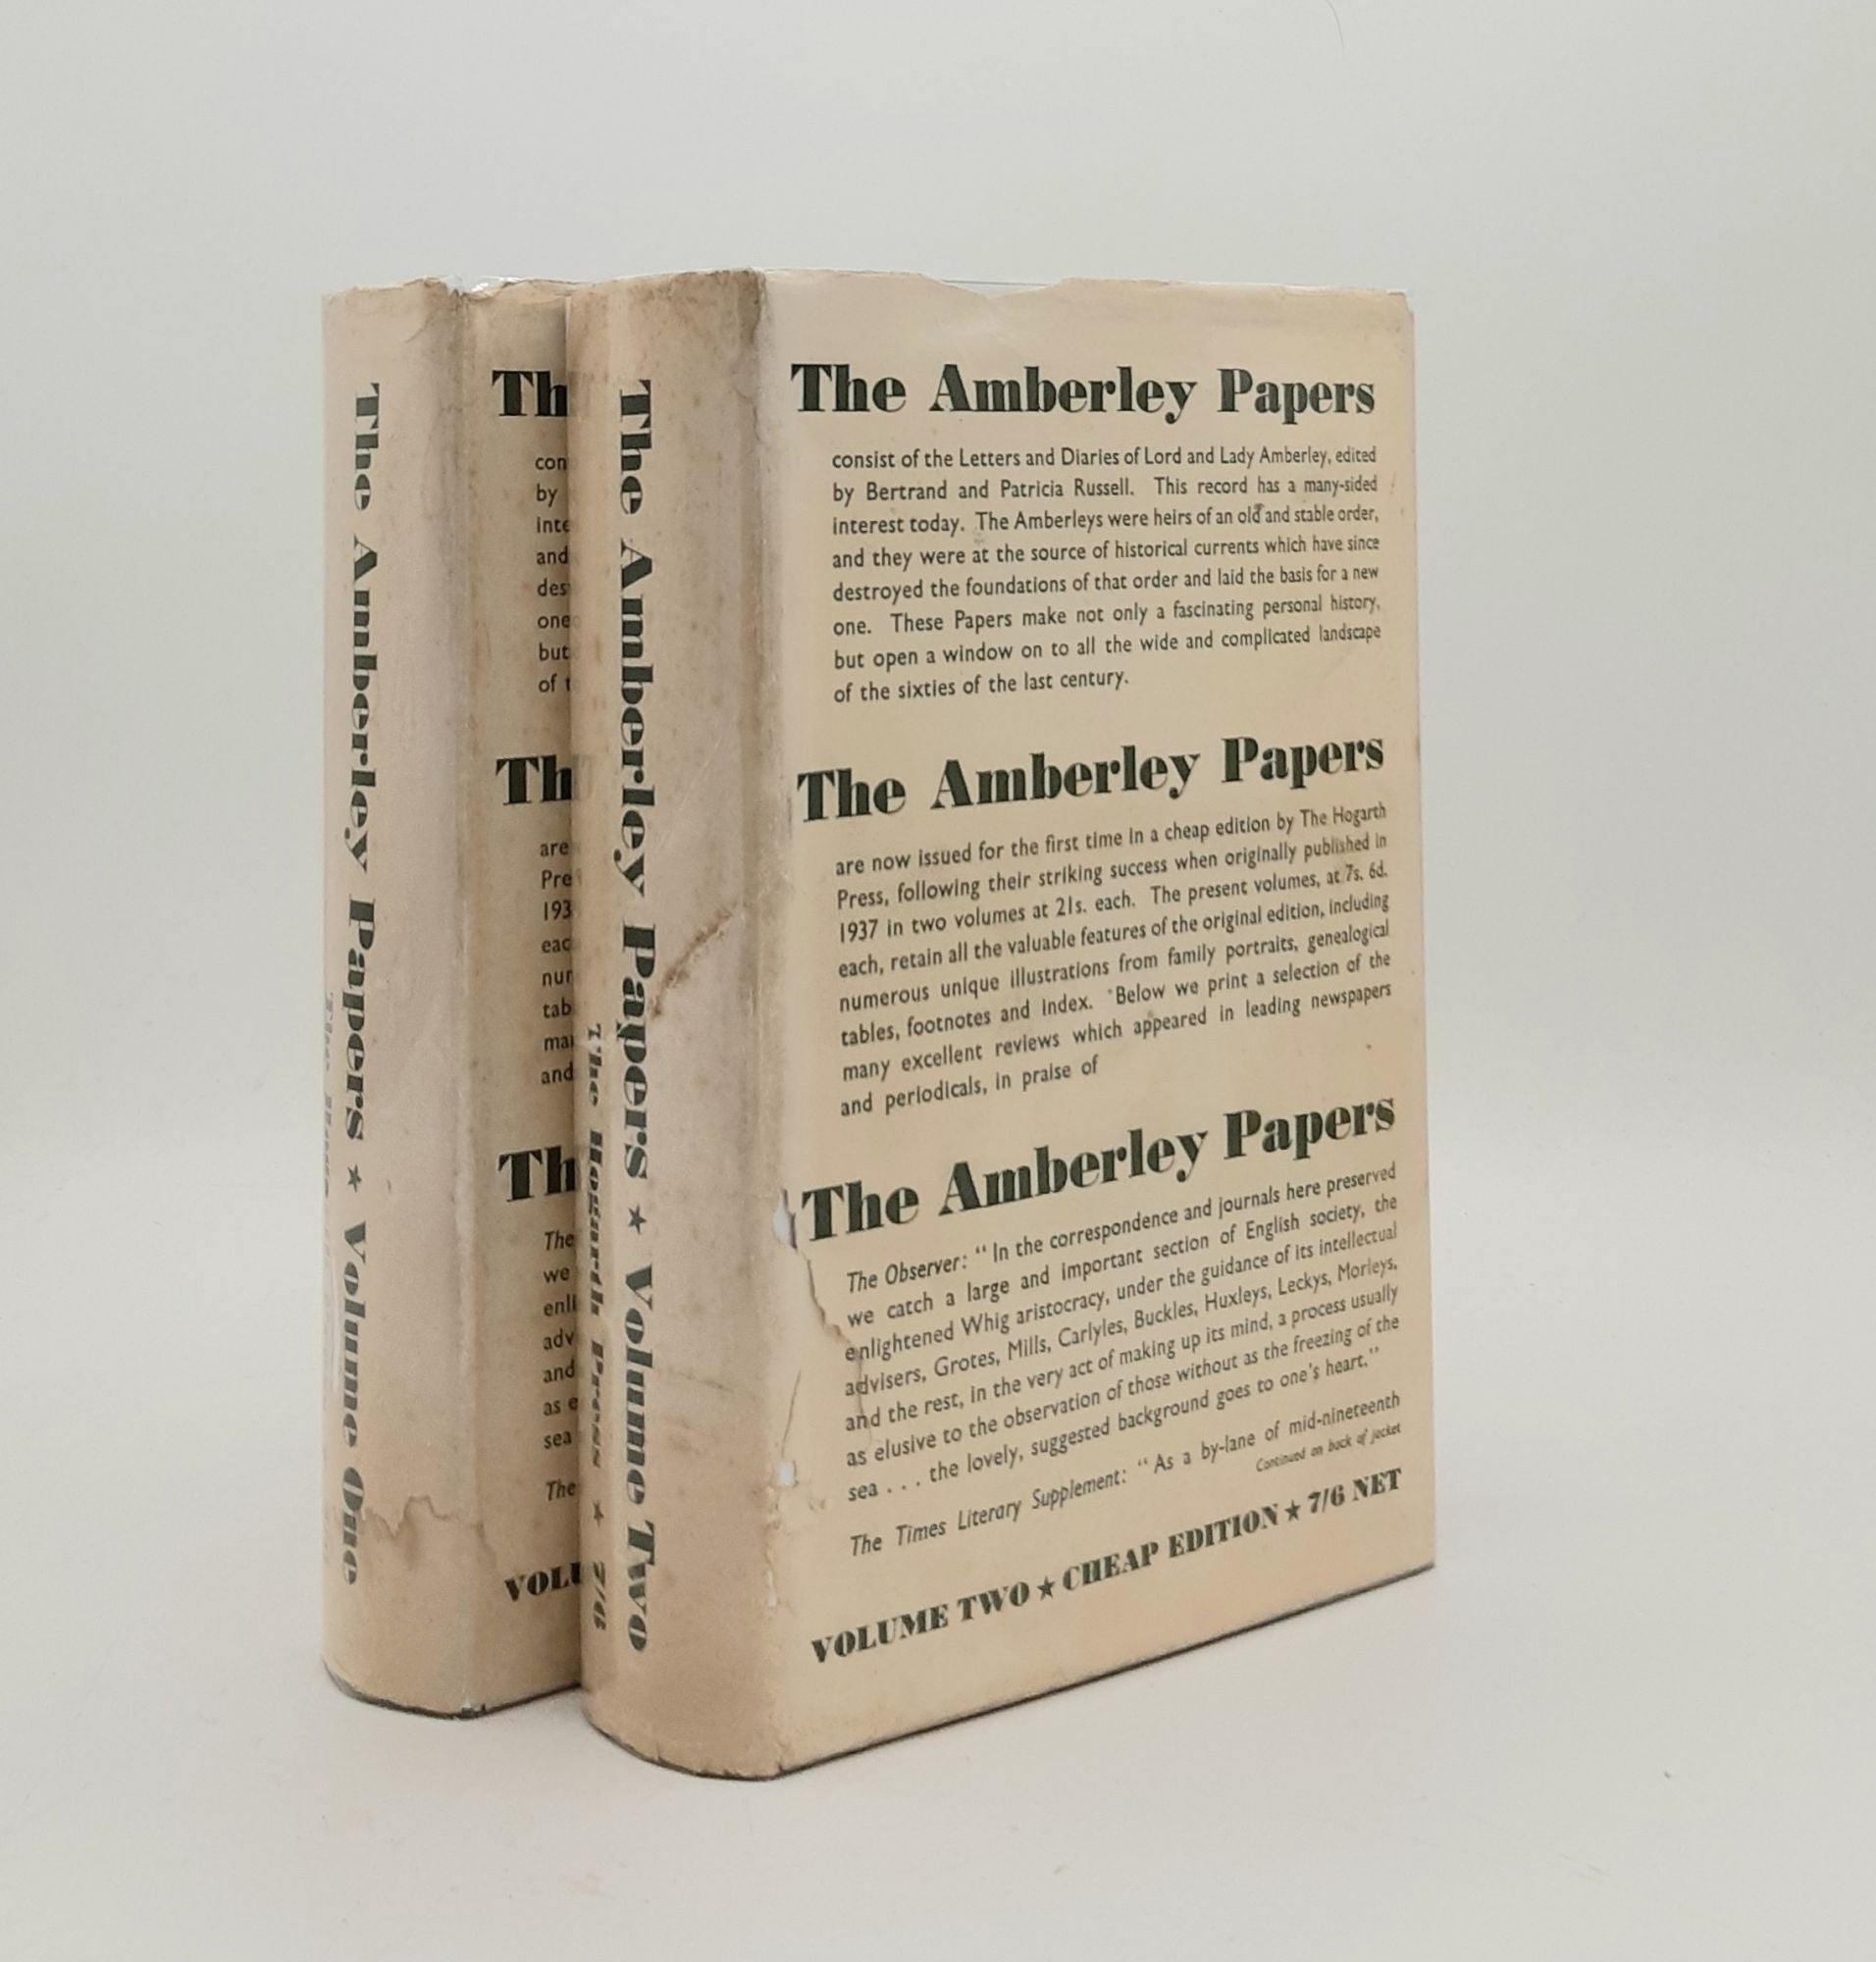 RUSSELL Bertrand, RUSSELL Patricia - The Amberley Papers the Letter and Diaries of Lord and Lady Amberley Volume One [&] Volume Two